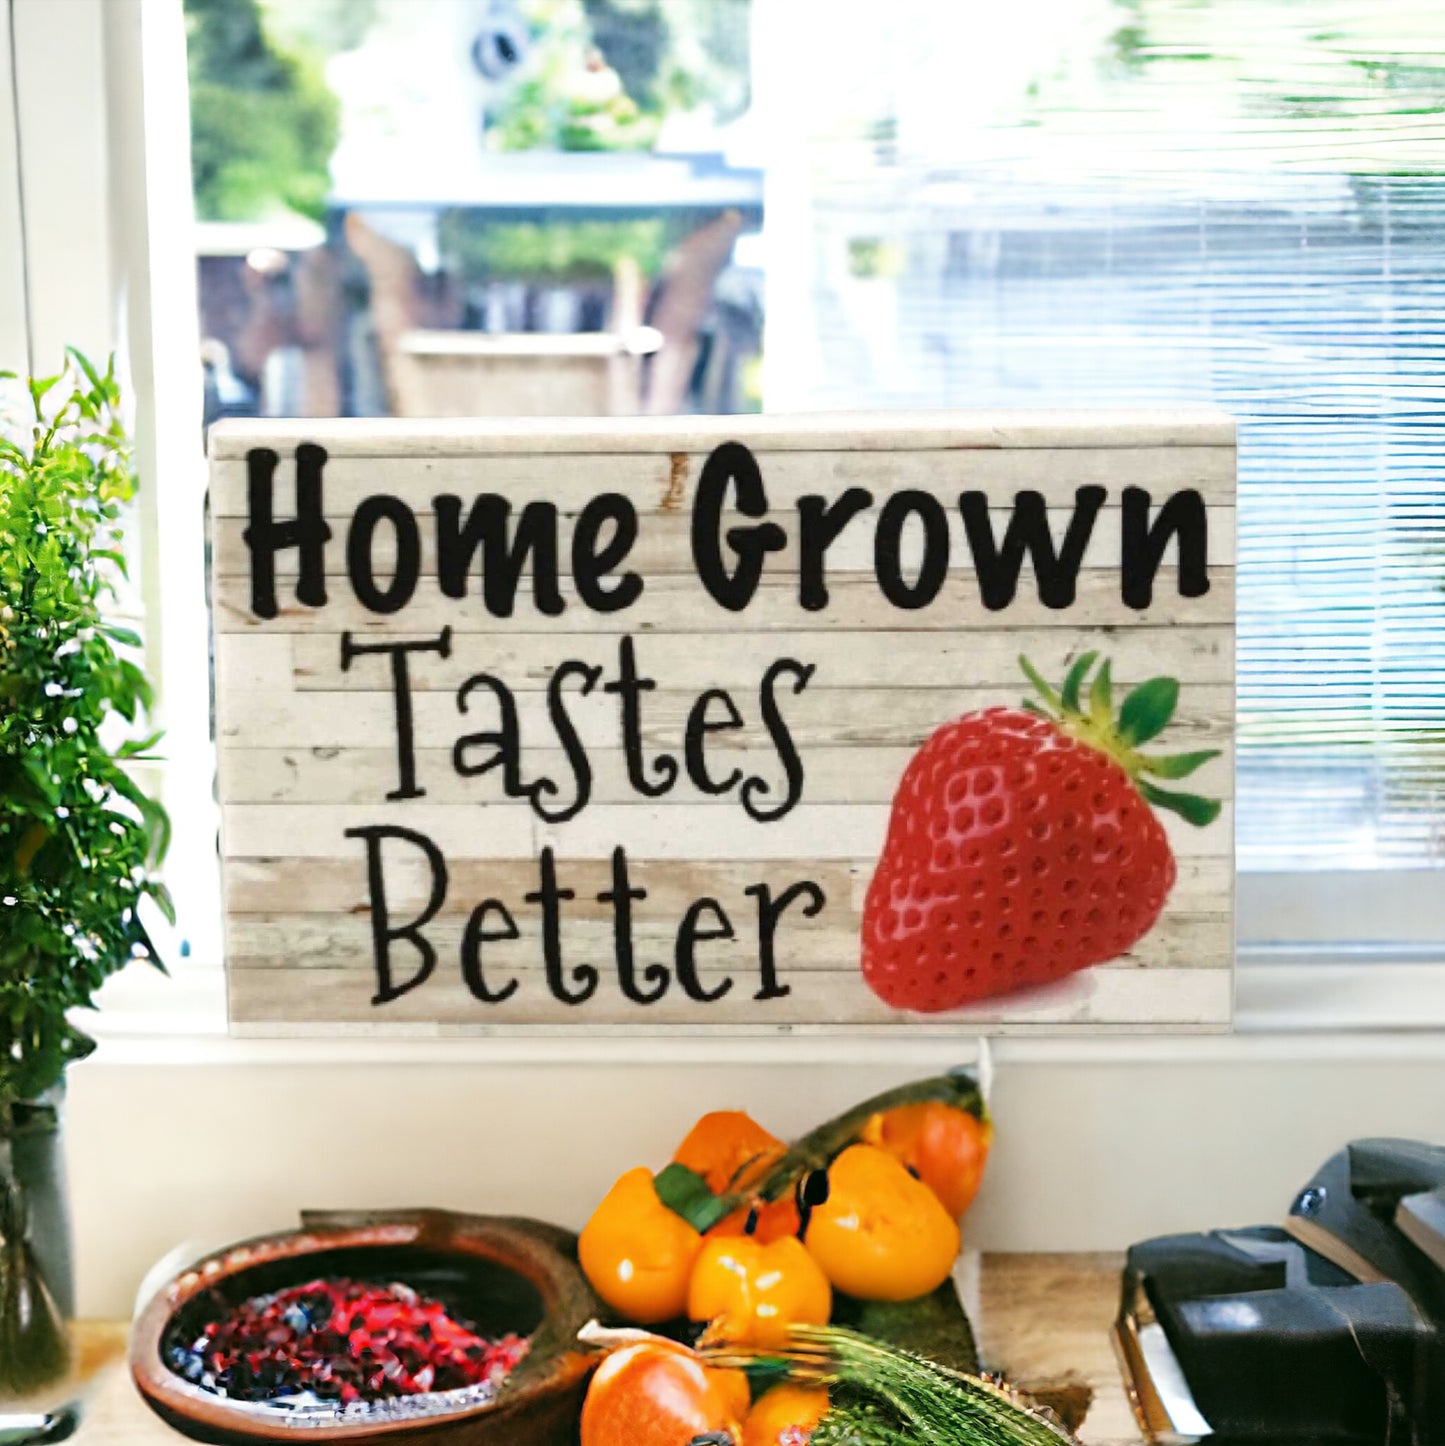 Home Grown Tastes Better Strawberry Sign - The Renmy Store Homewares & Gifts 